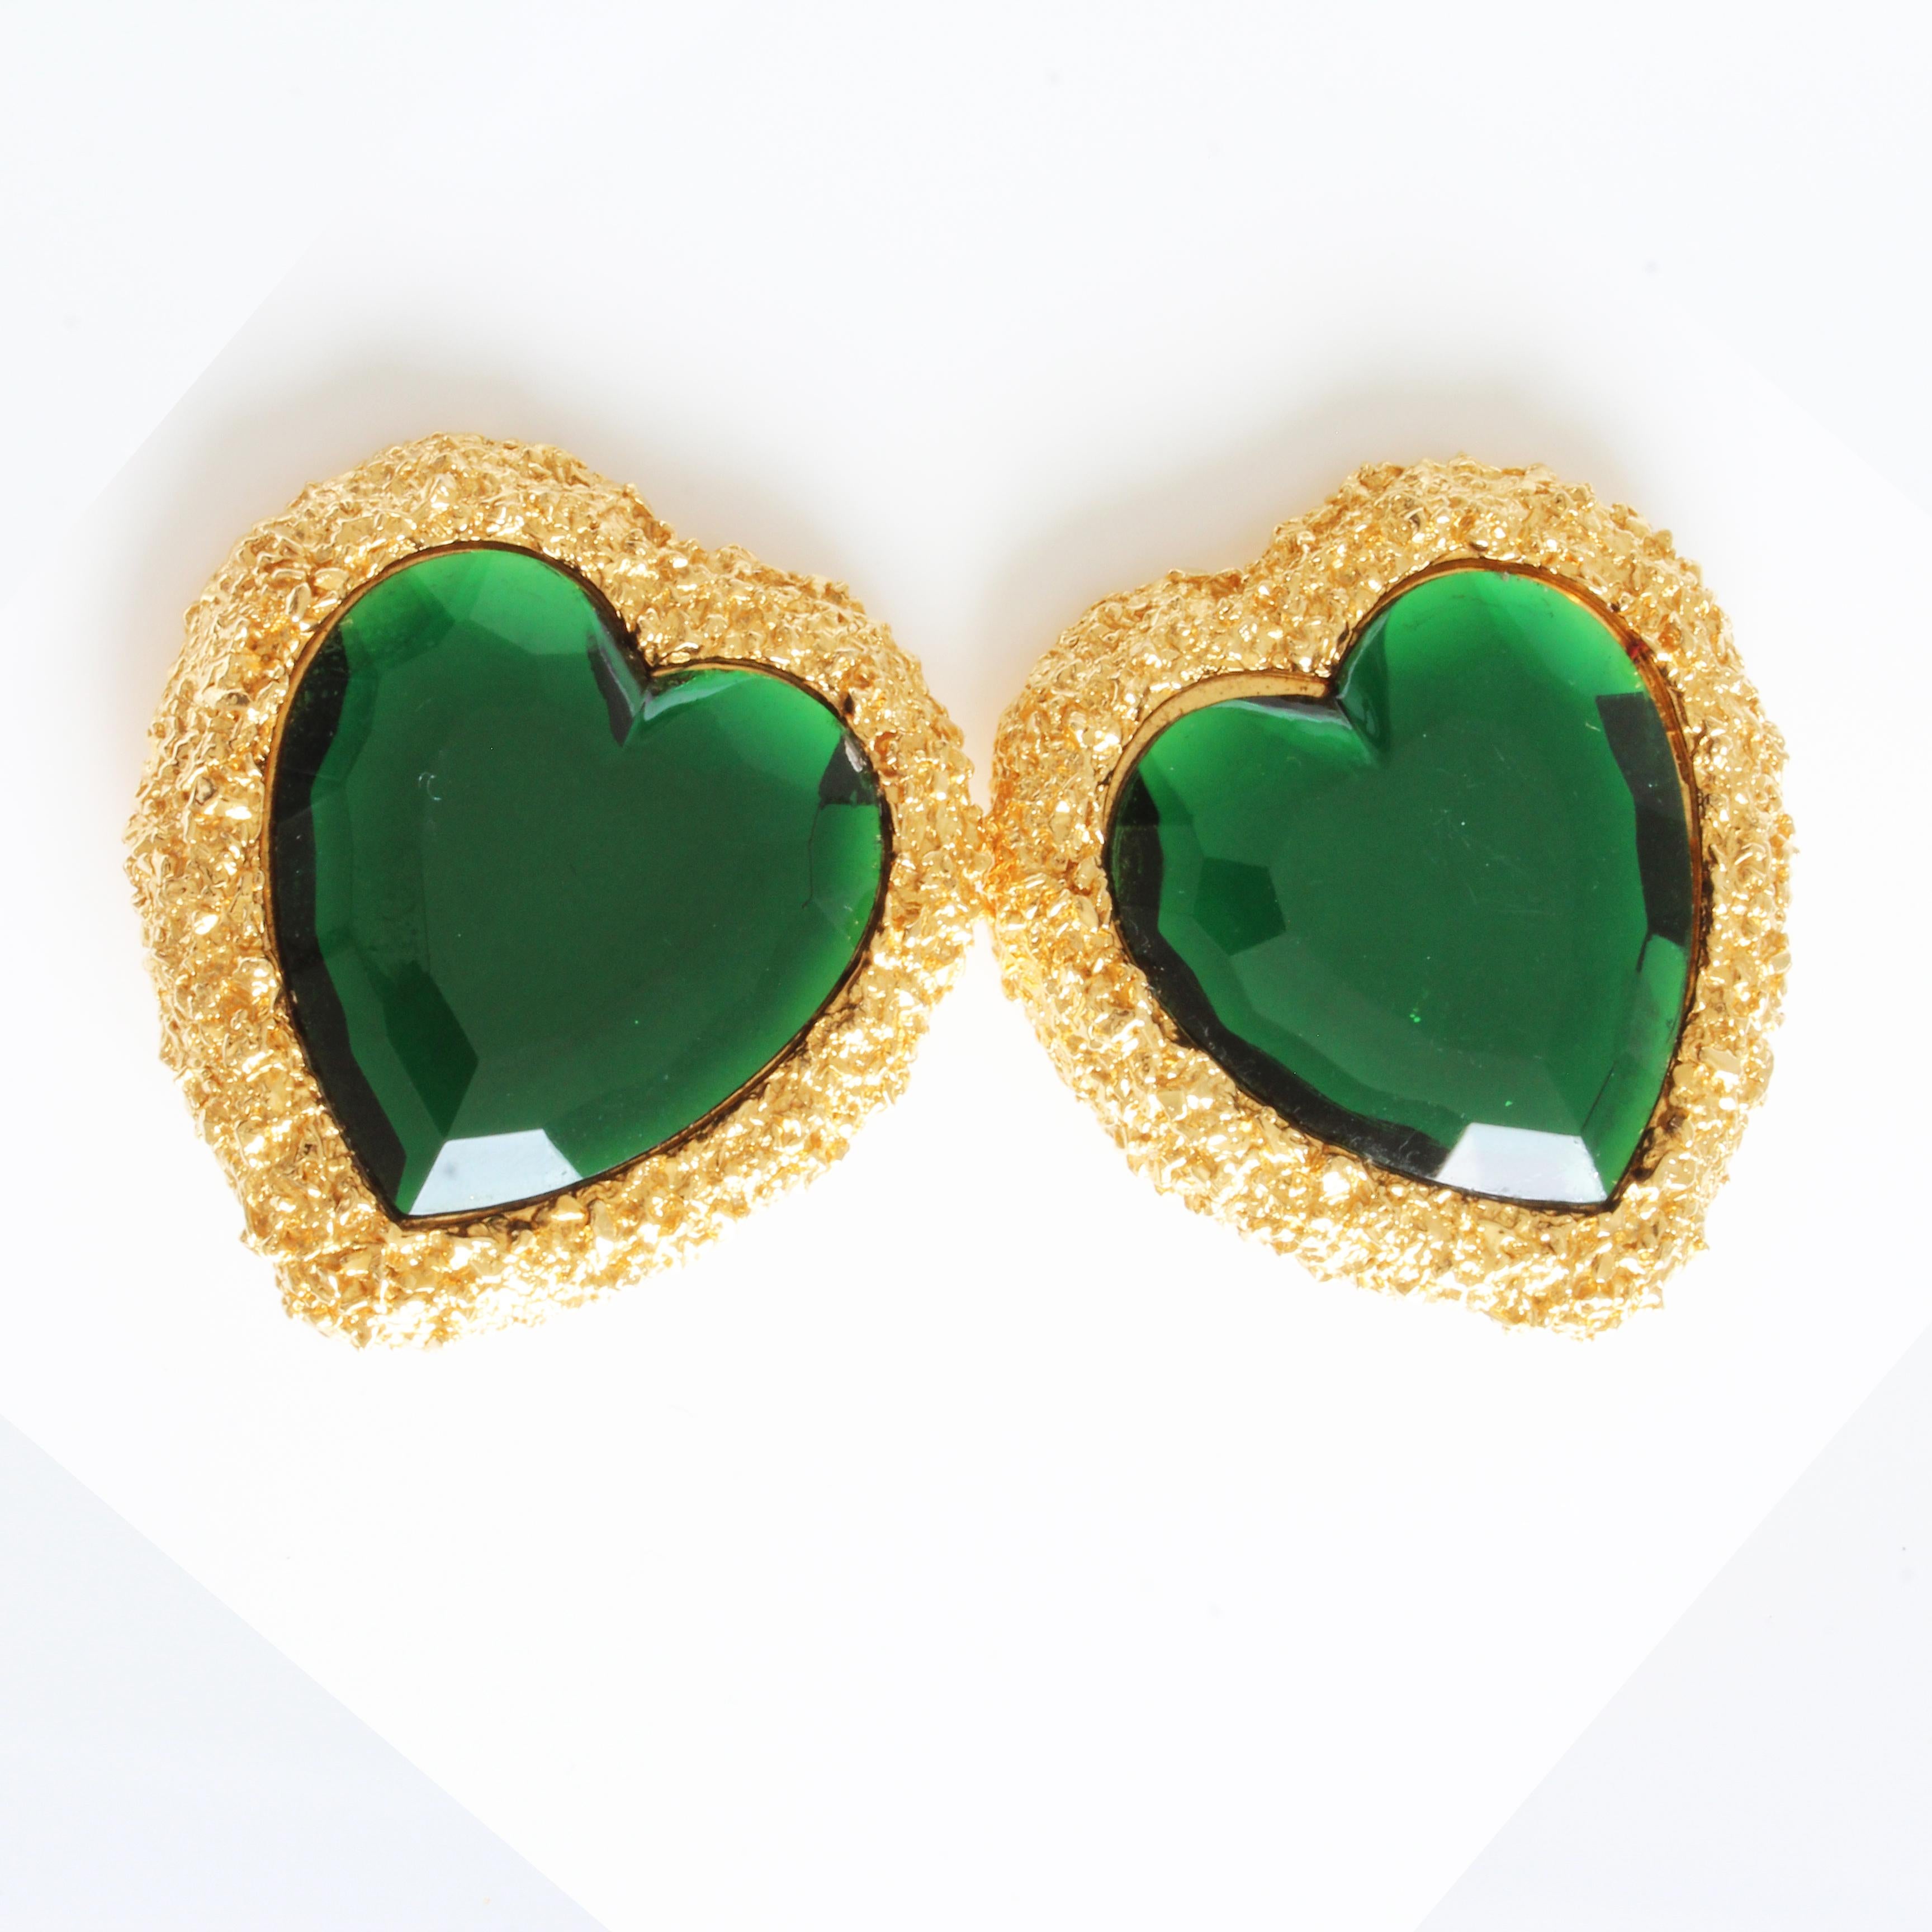 These massive gold tone and emerald crystal heart-shaped earrings were made by D'Orlan, manufacturer of costume pieces for Nina Ricci and Lancel, most likely in the 1980s. Made from gold textured metal settings, they feature emerald green colored,